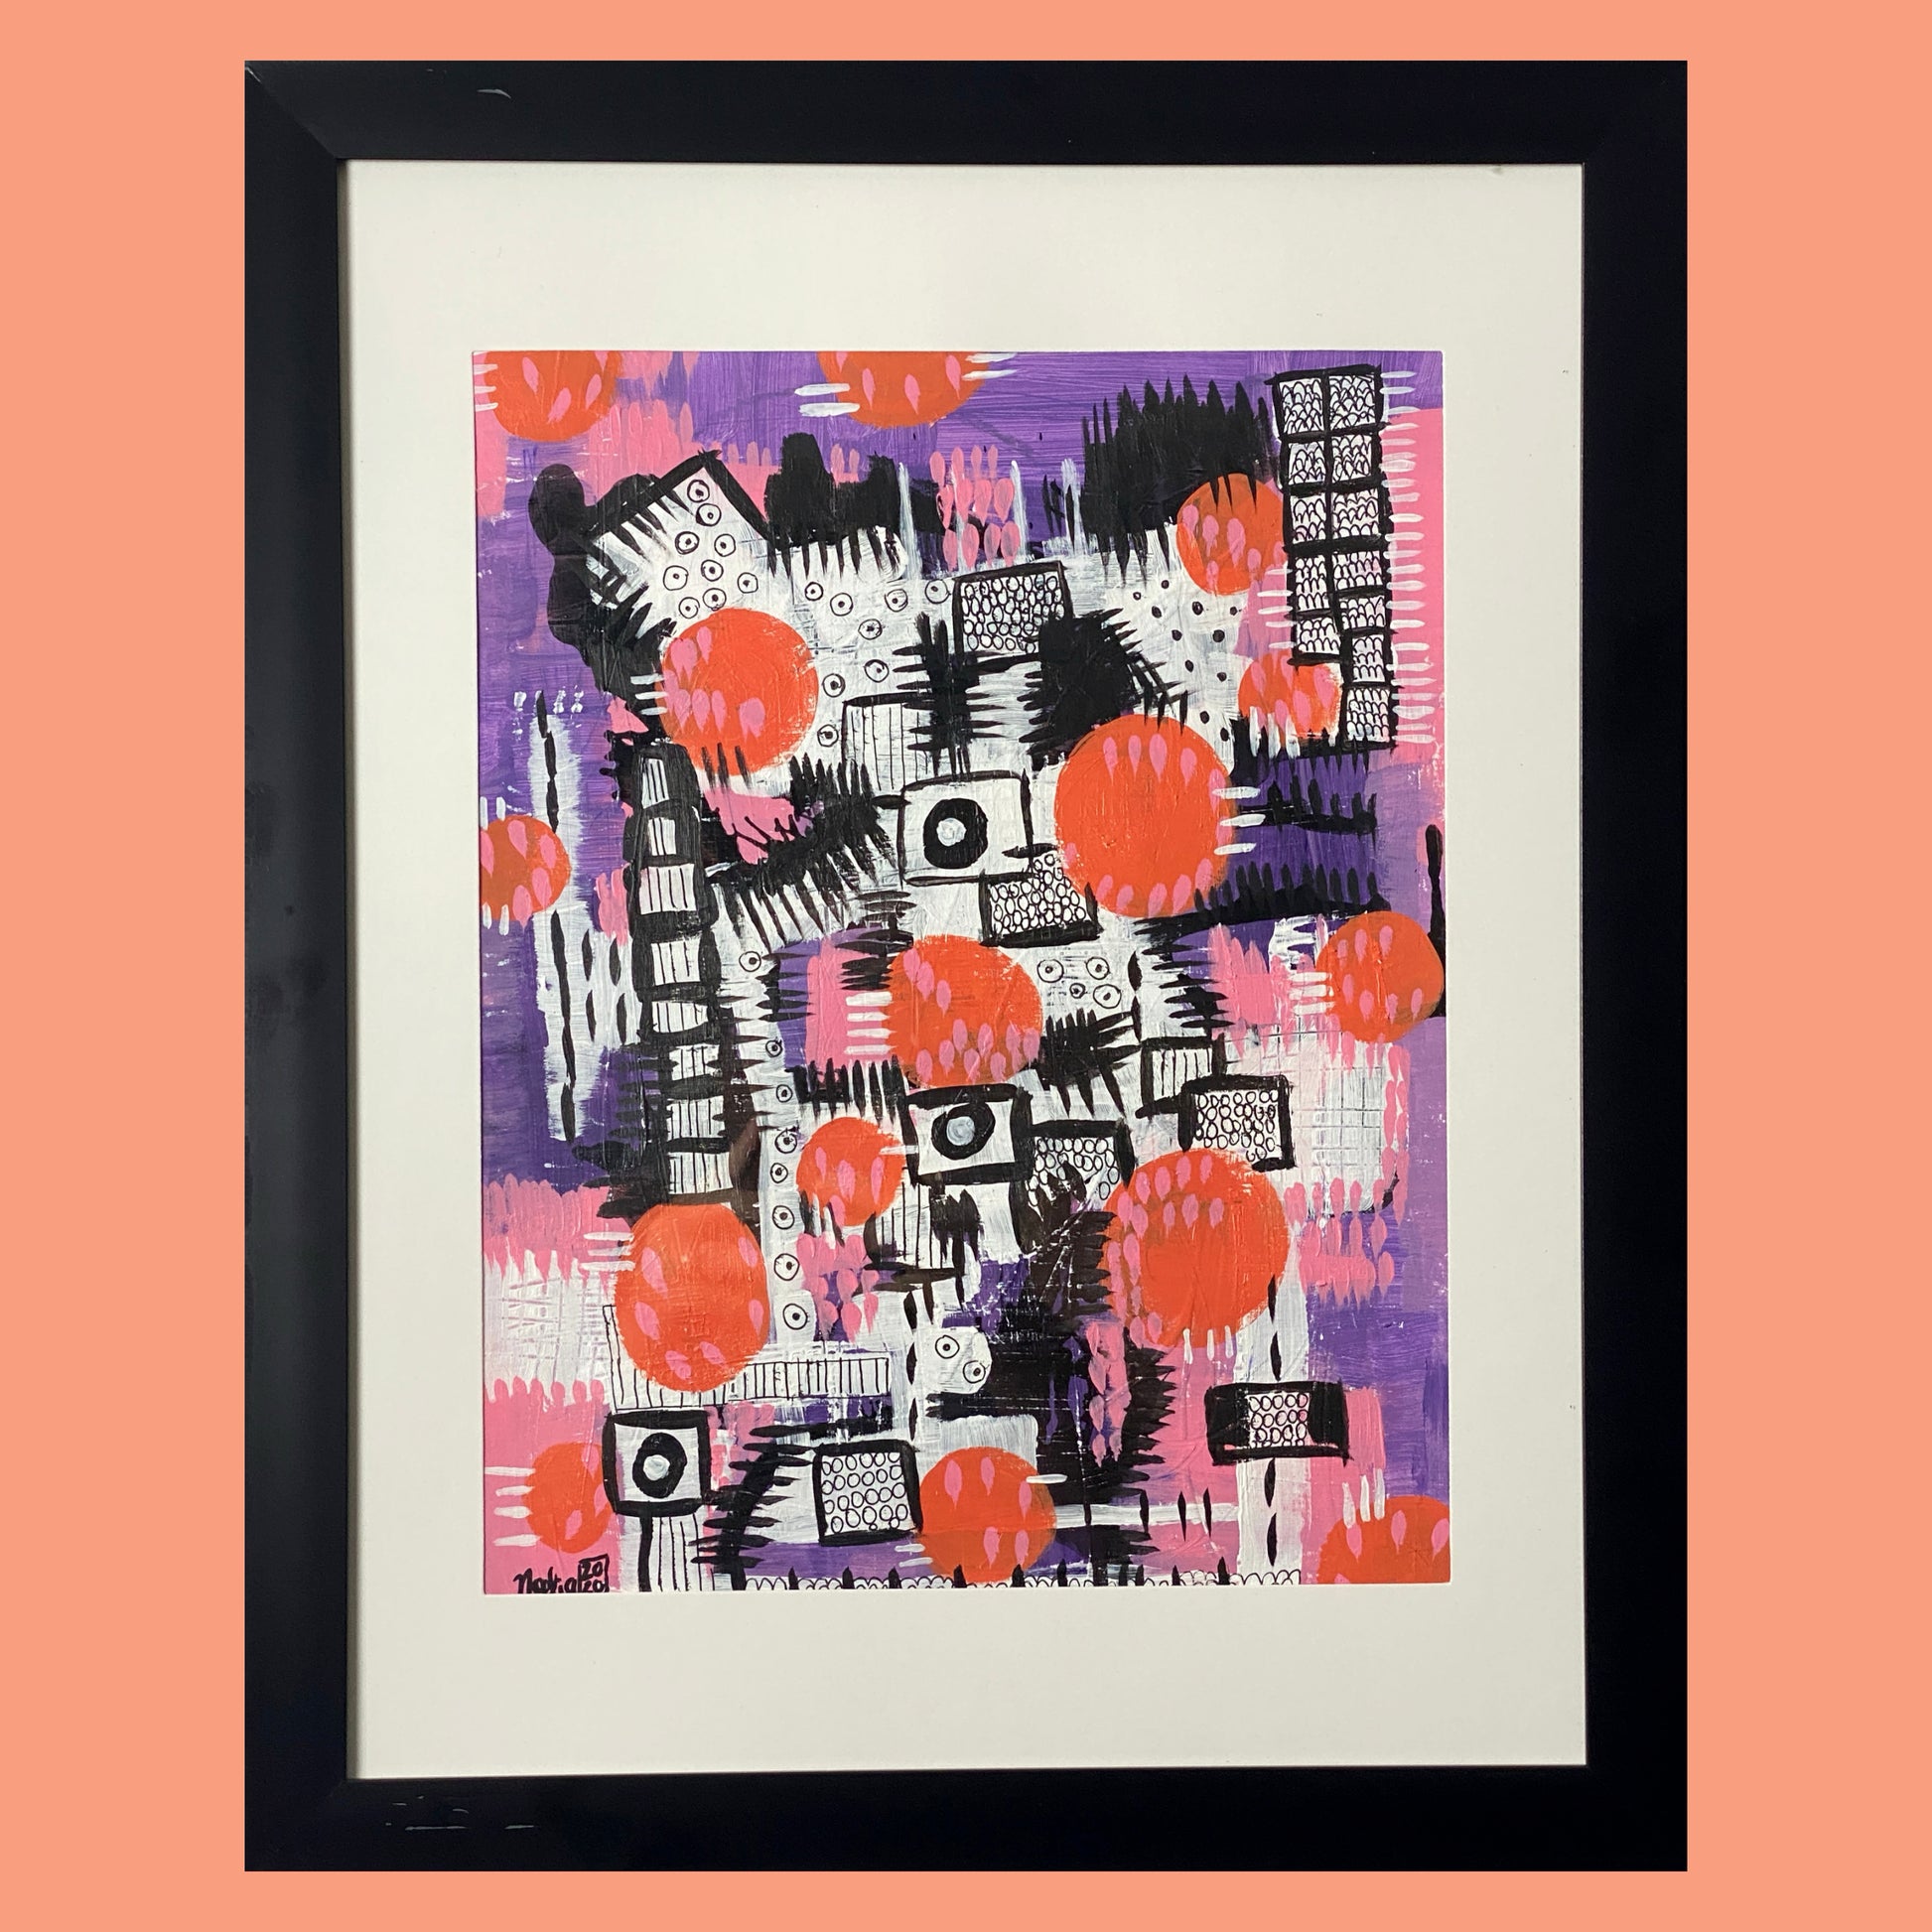 Acrylic abstract in purple, orange and black of different shapes painted on bristol paper